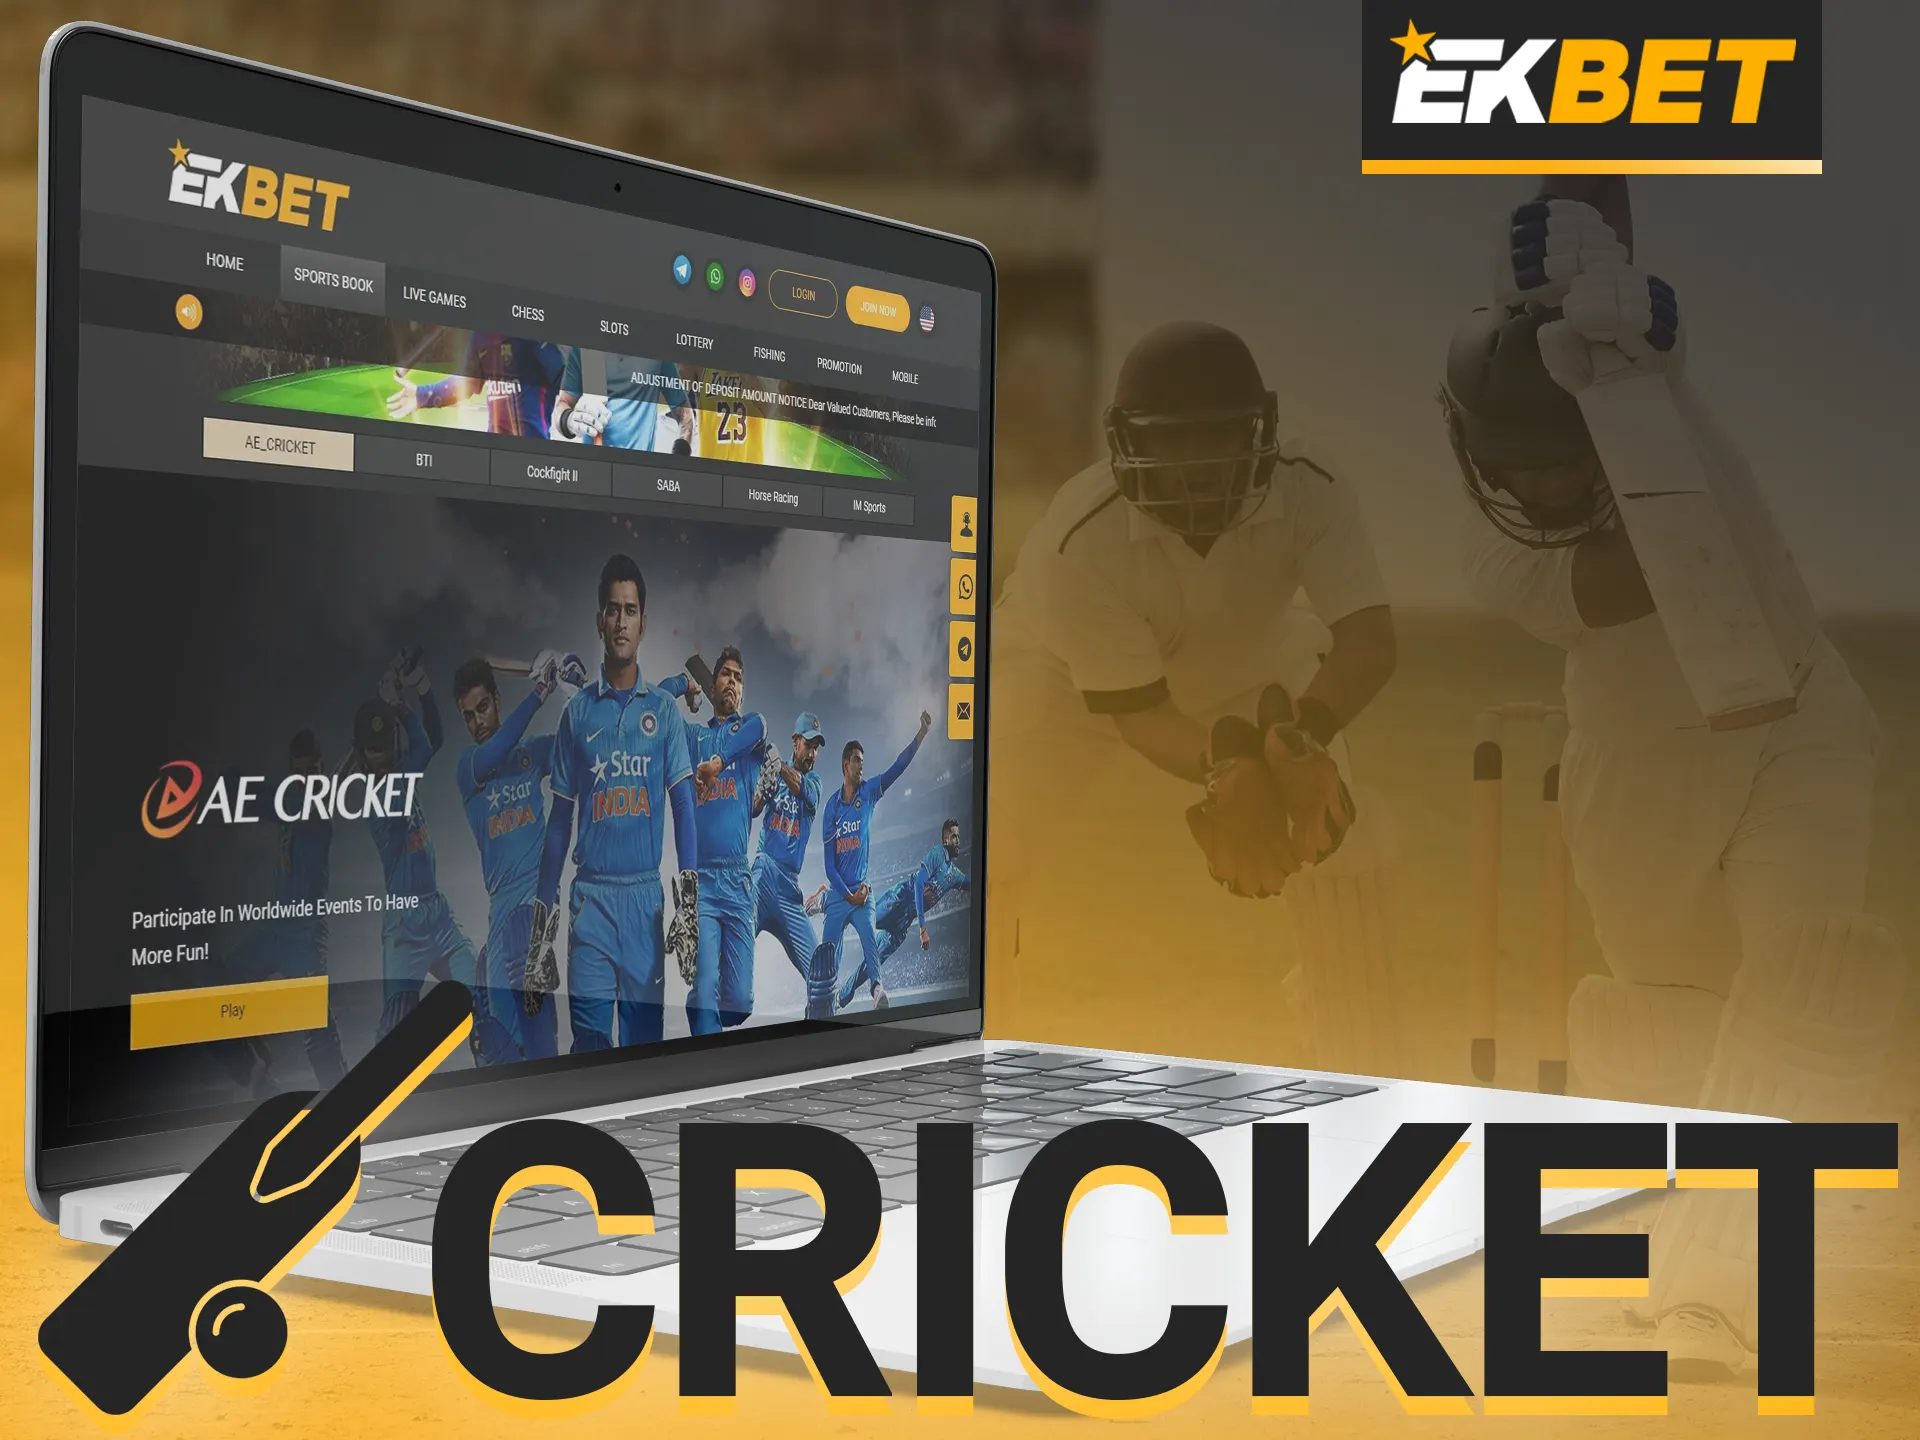 Place your bets on cricket with EKbet.